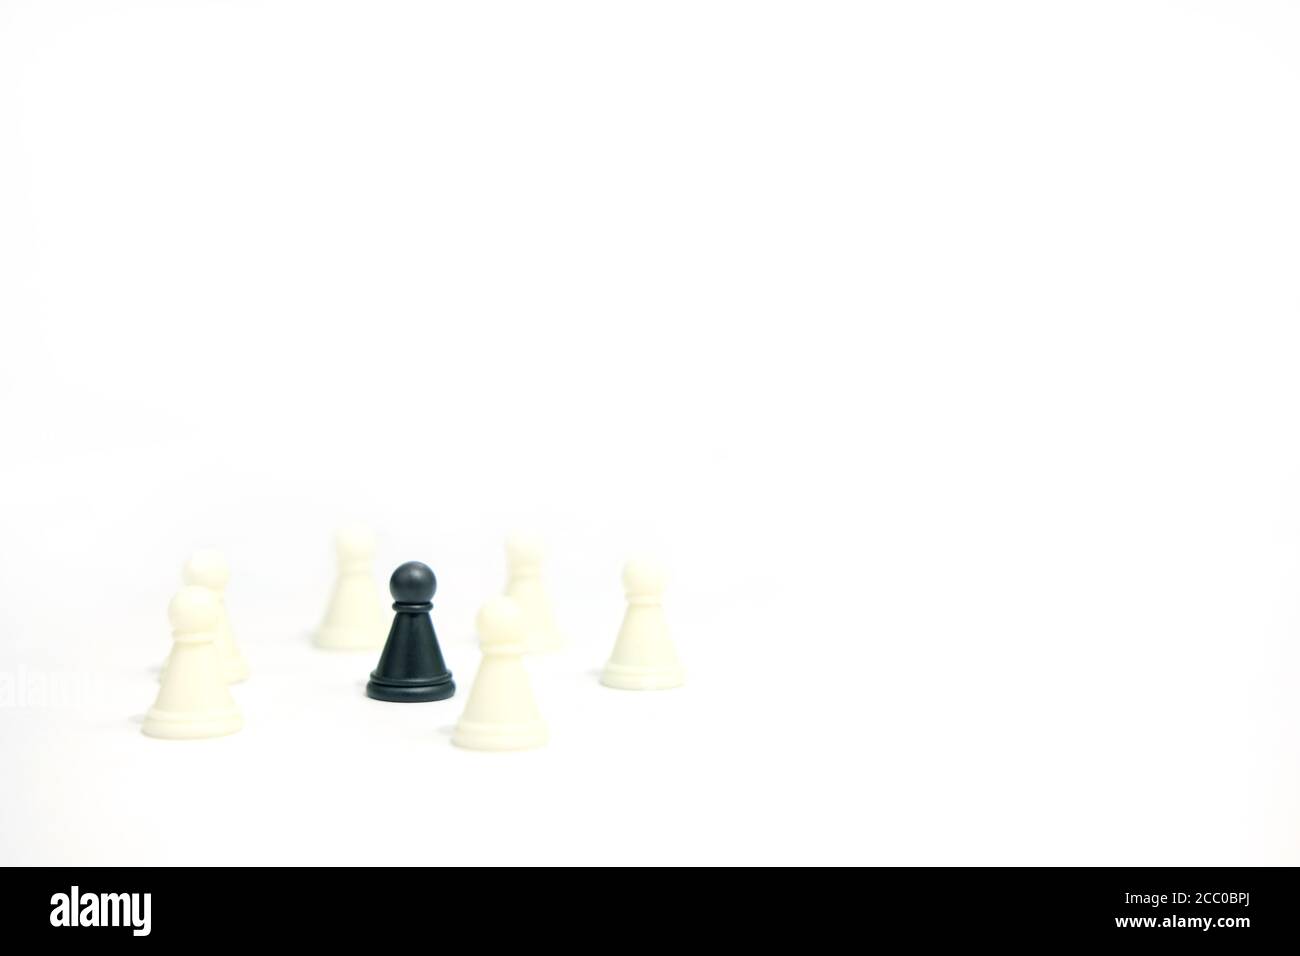 Miniature business strategy concept - black pawn standing between chess piece - front view Stock Photo